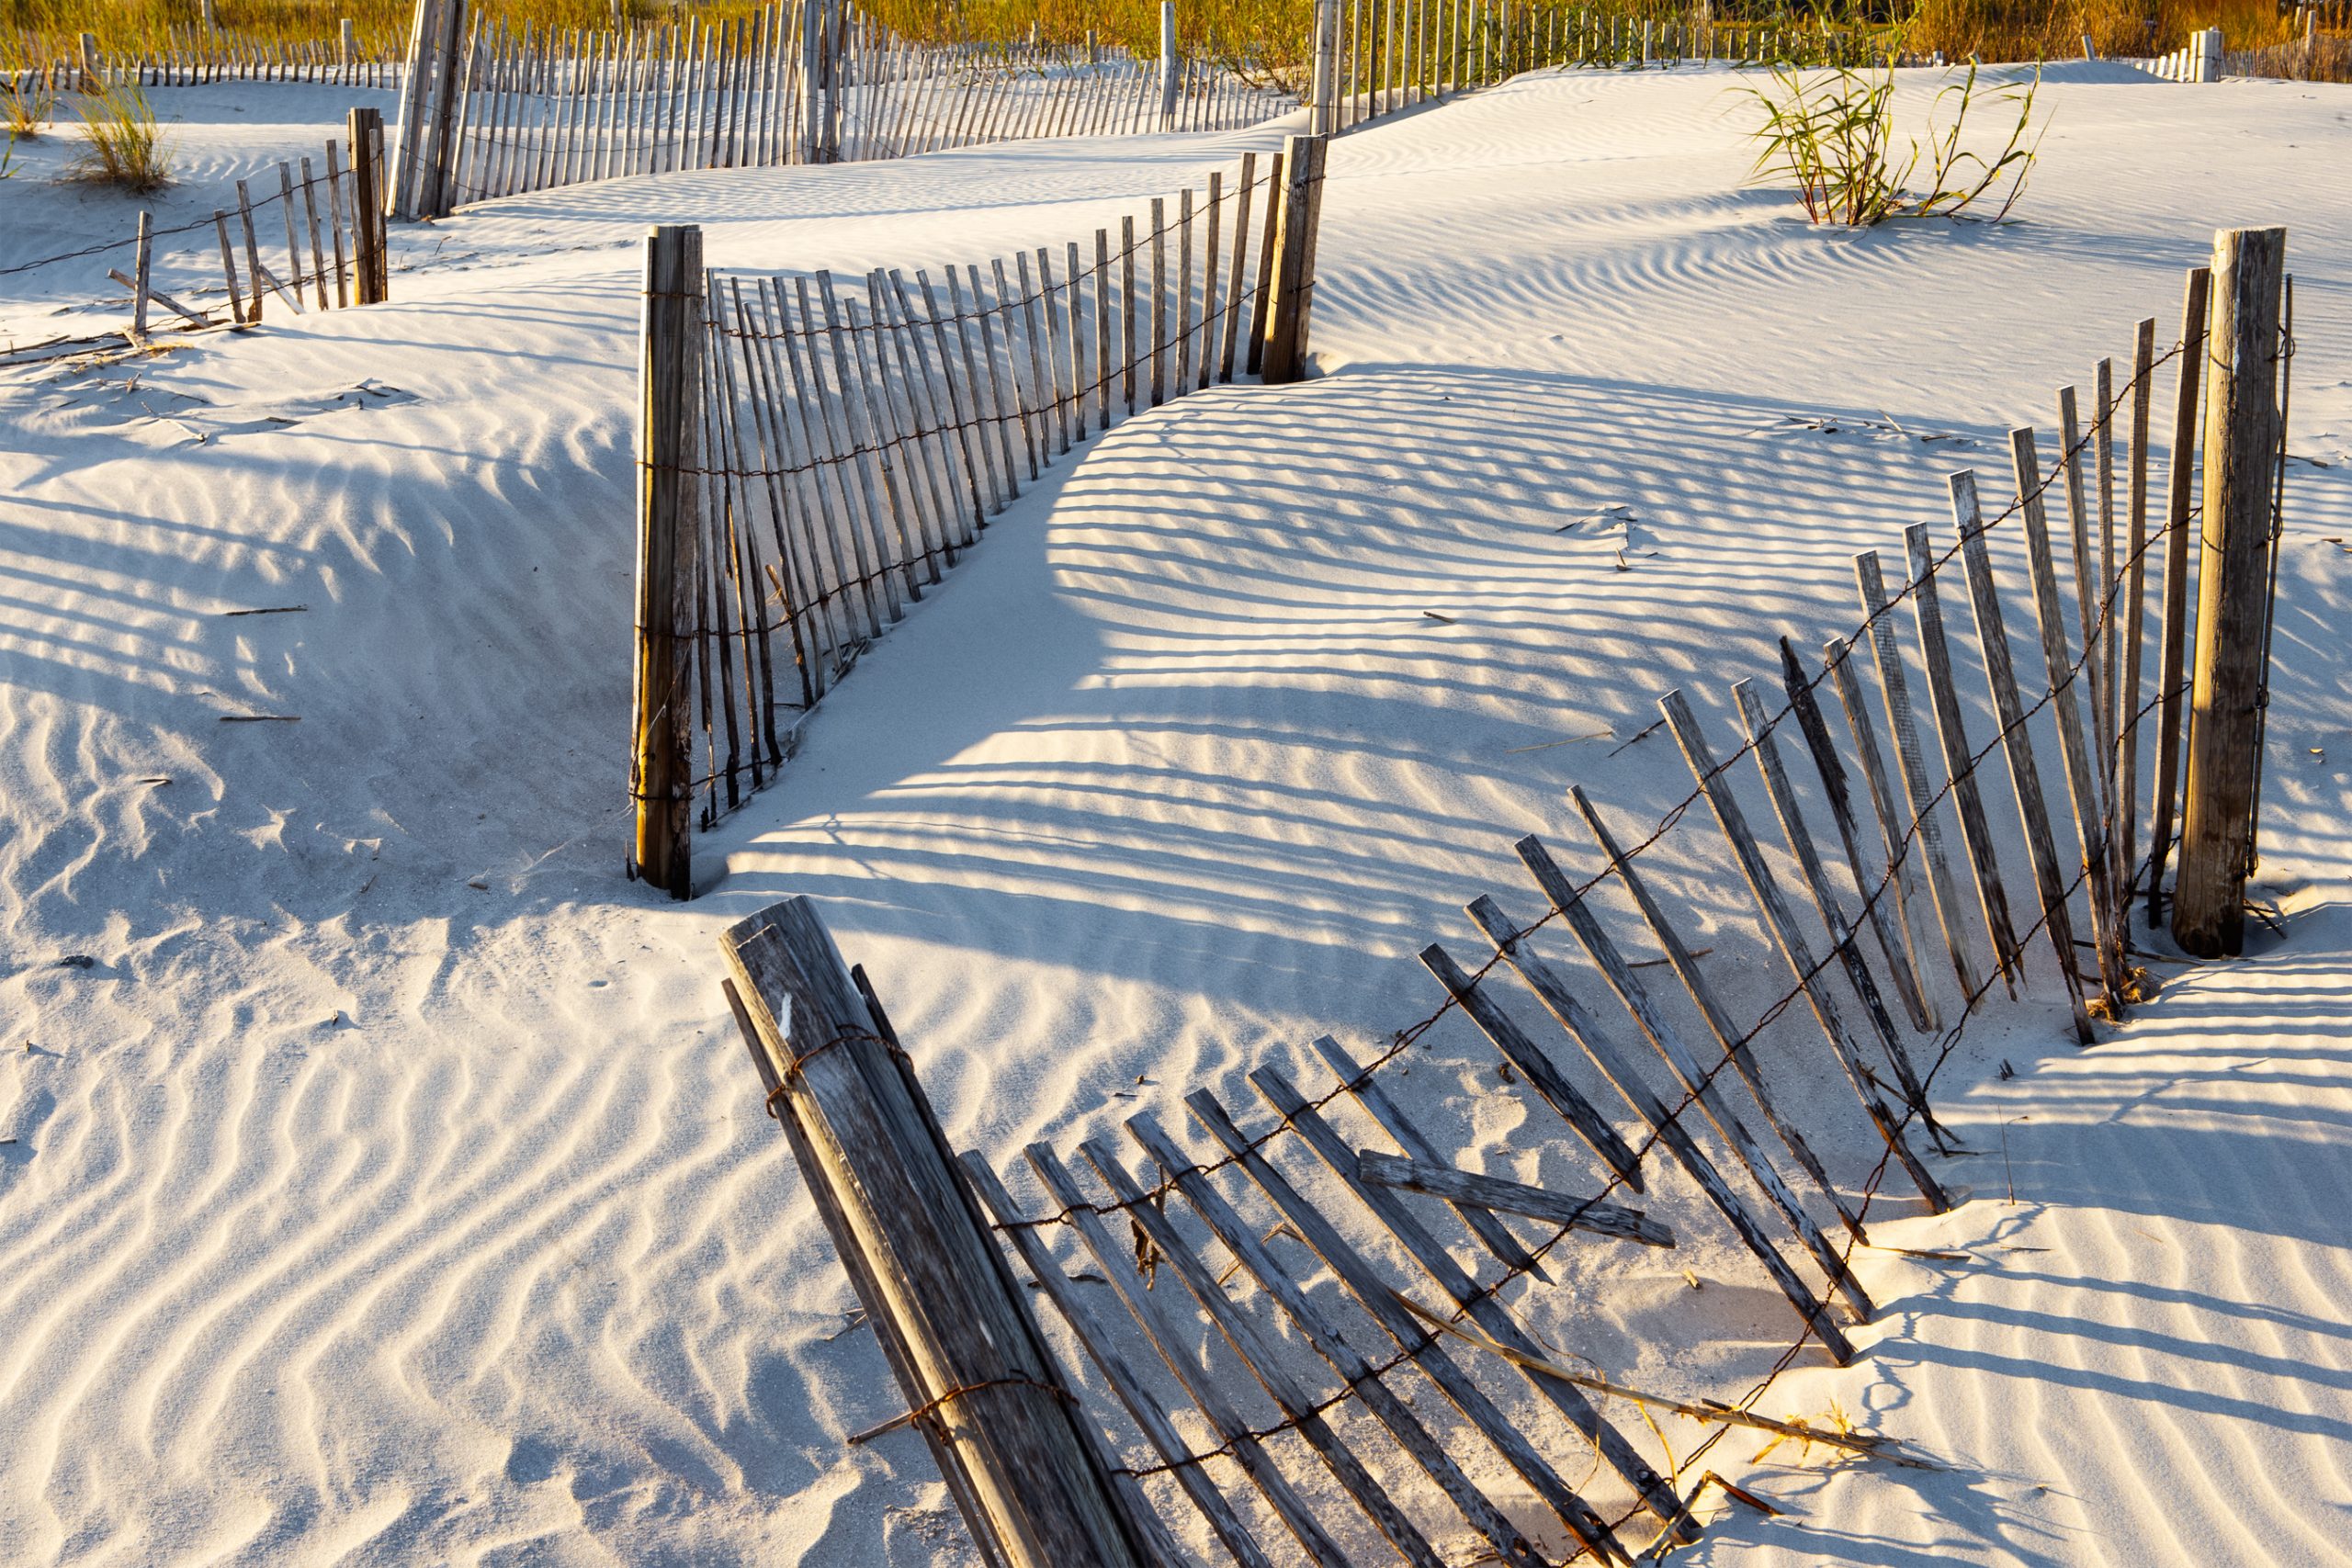 Sand fences stabilize sand dunes, critical to protecting land and homes along the beach. Tides, strong winds, and Father Time all work on weathering the wooden slats within the fence. Over time, nature crafts its artistry as light and shadows excite our vision.